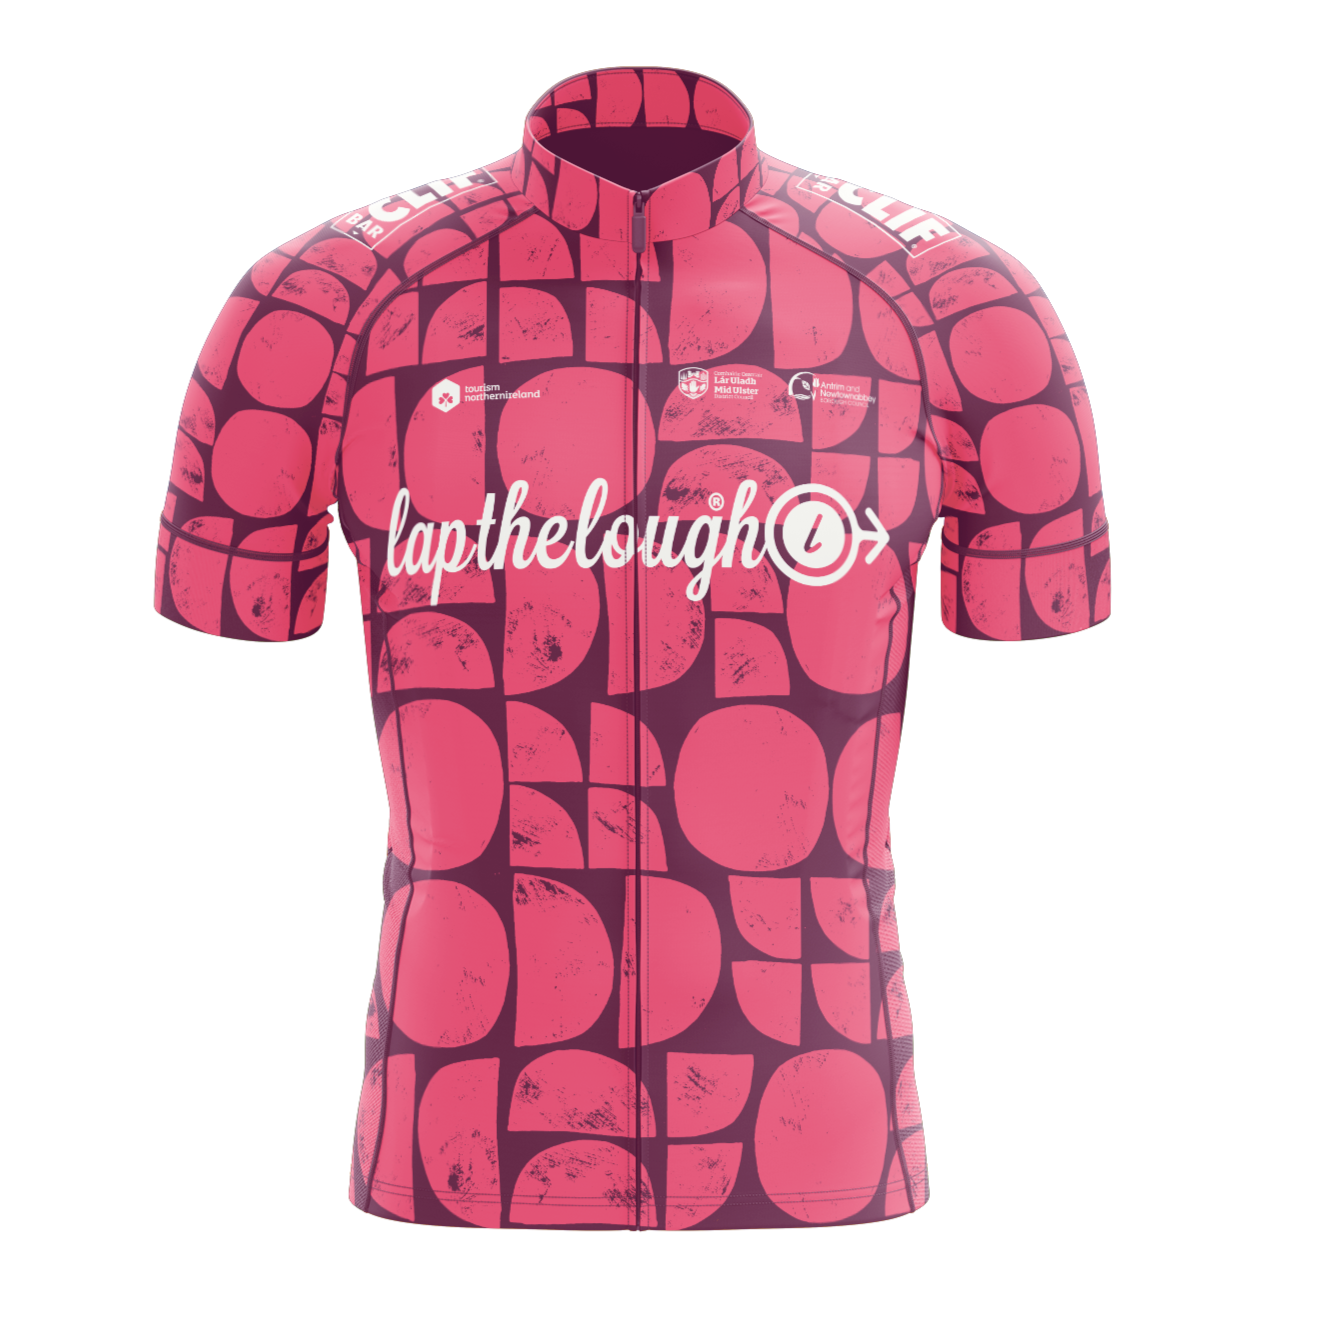 Lap 14 Cycle Jersey (low stock)